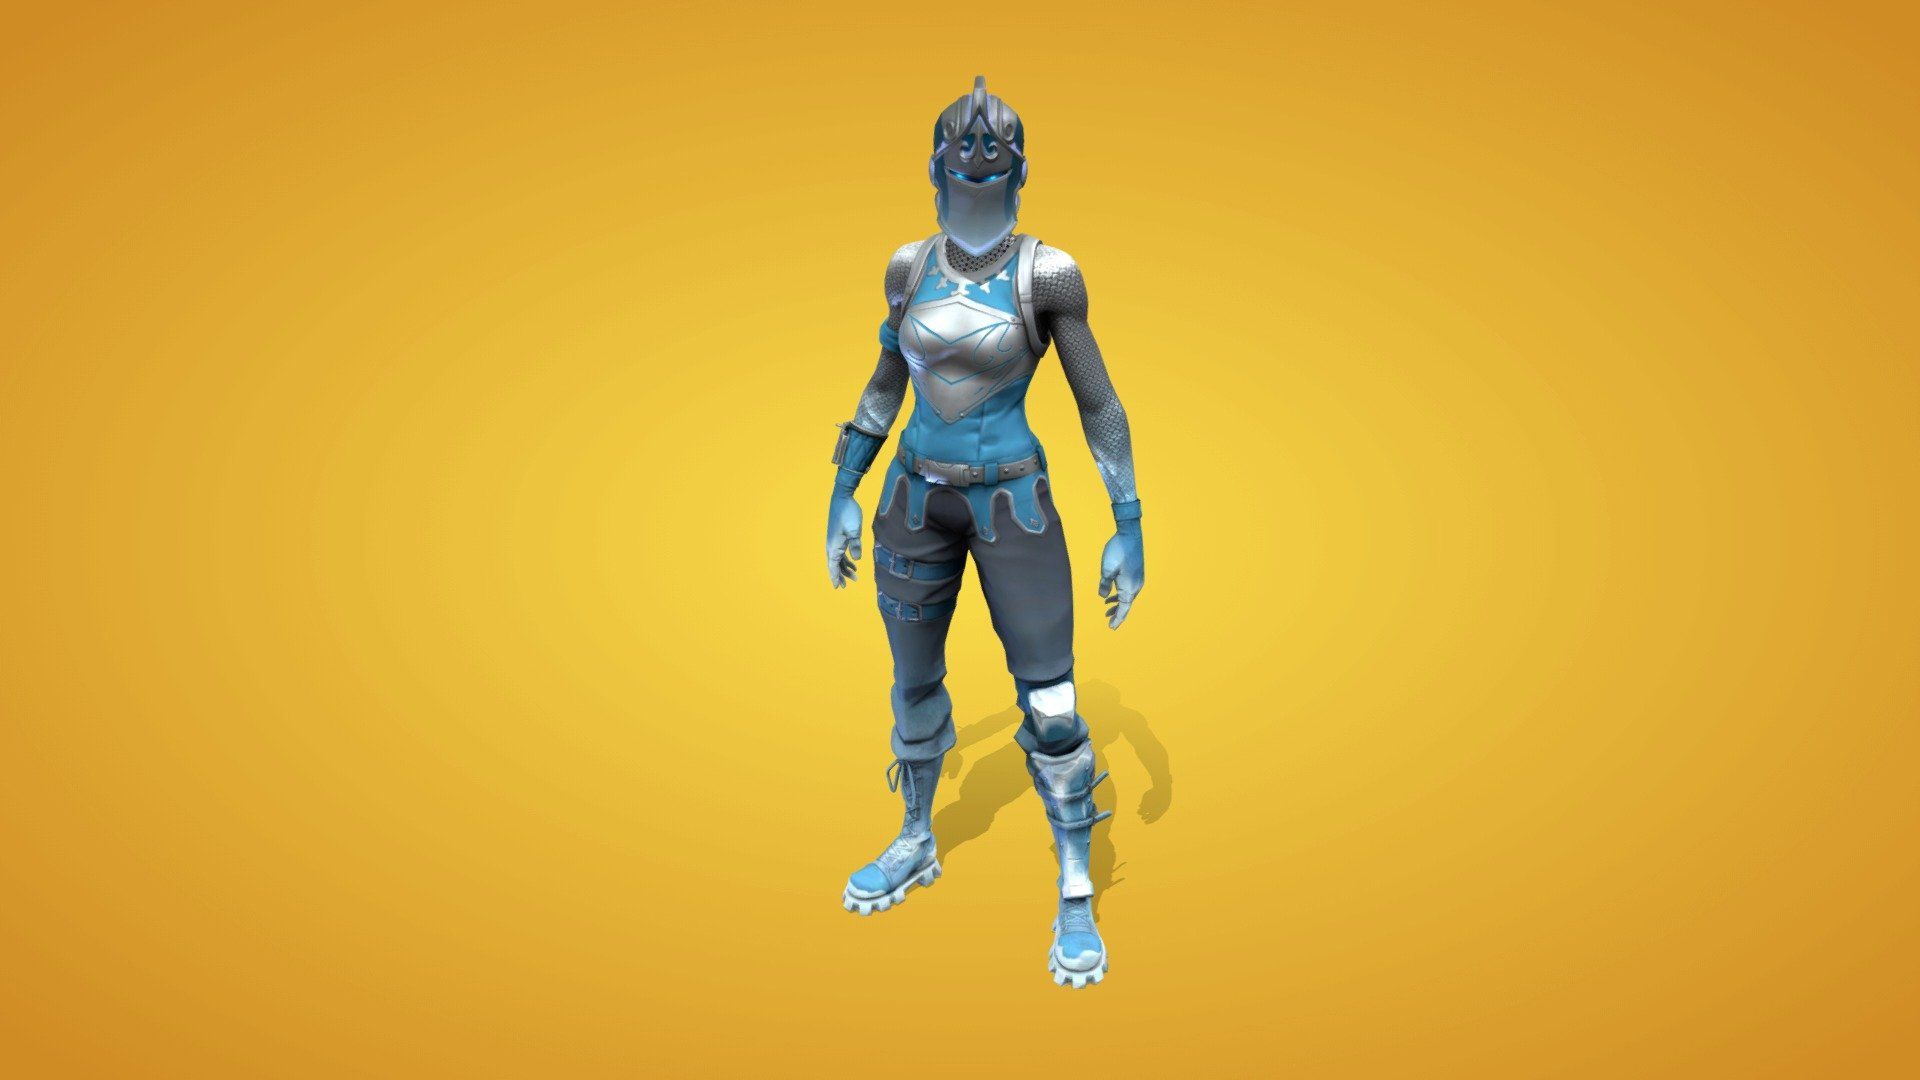 Frozen Red Knight Outfit model